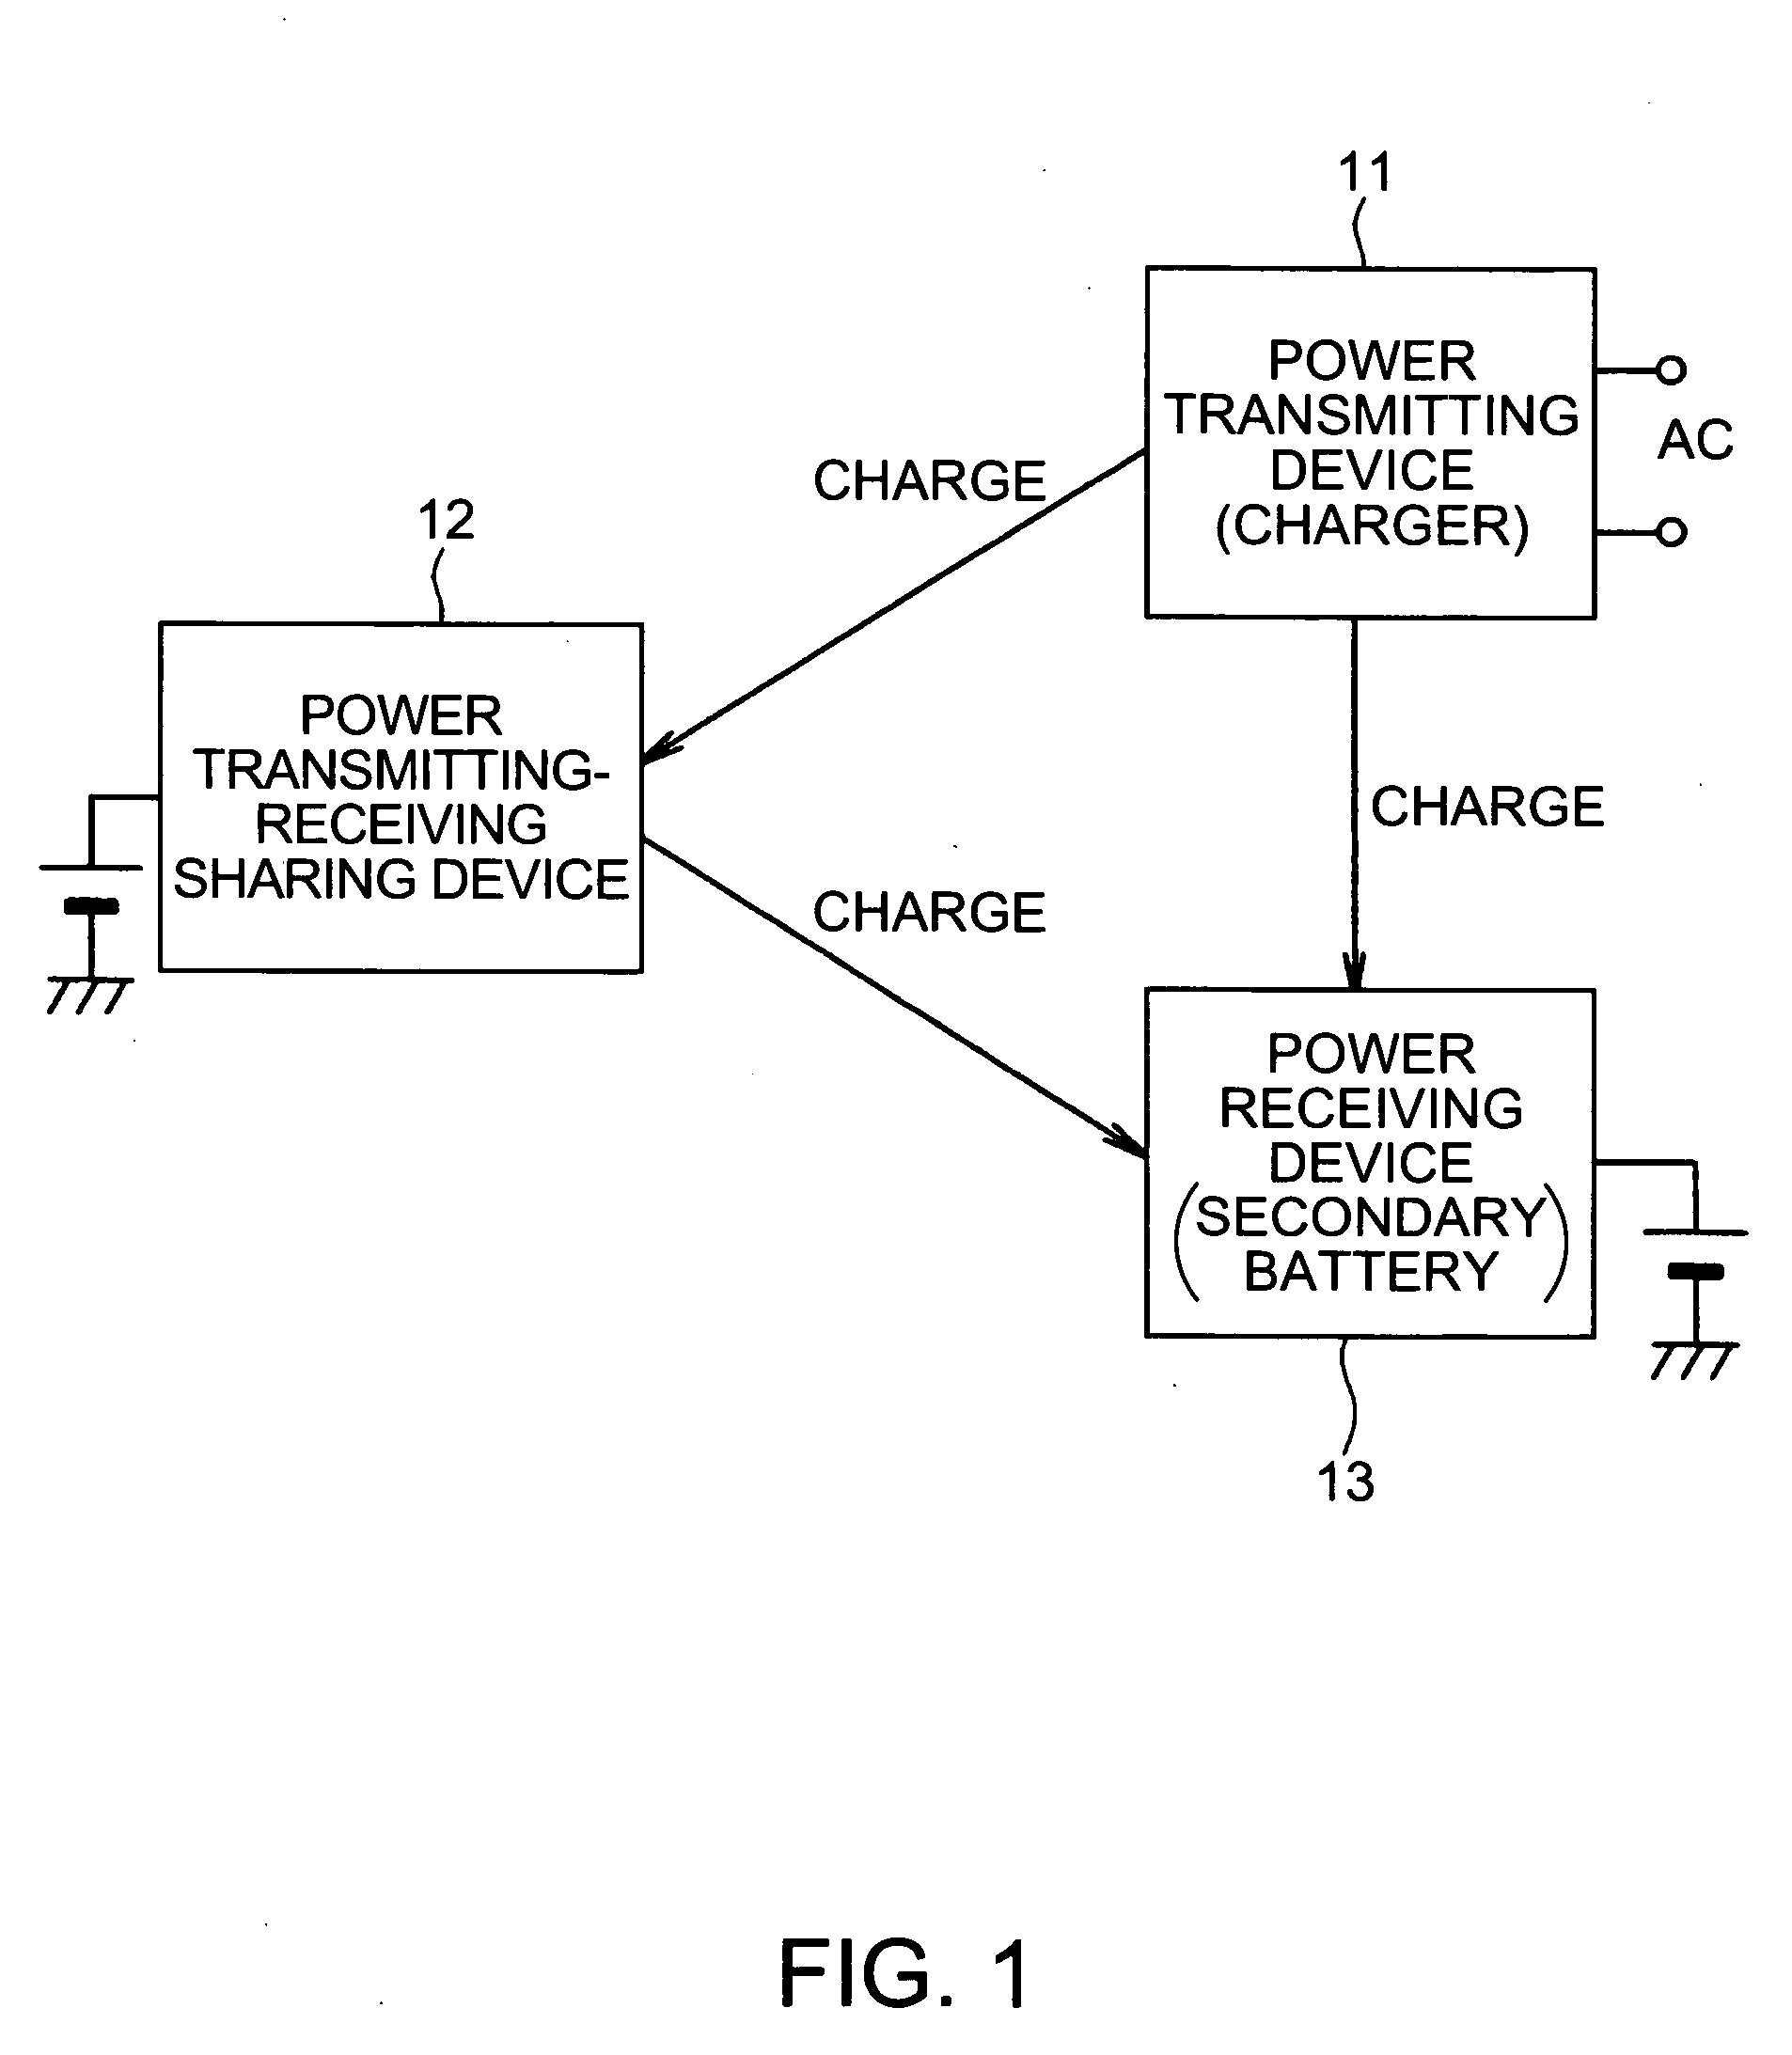 Contactless power transmitting device